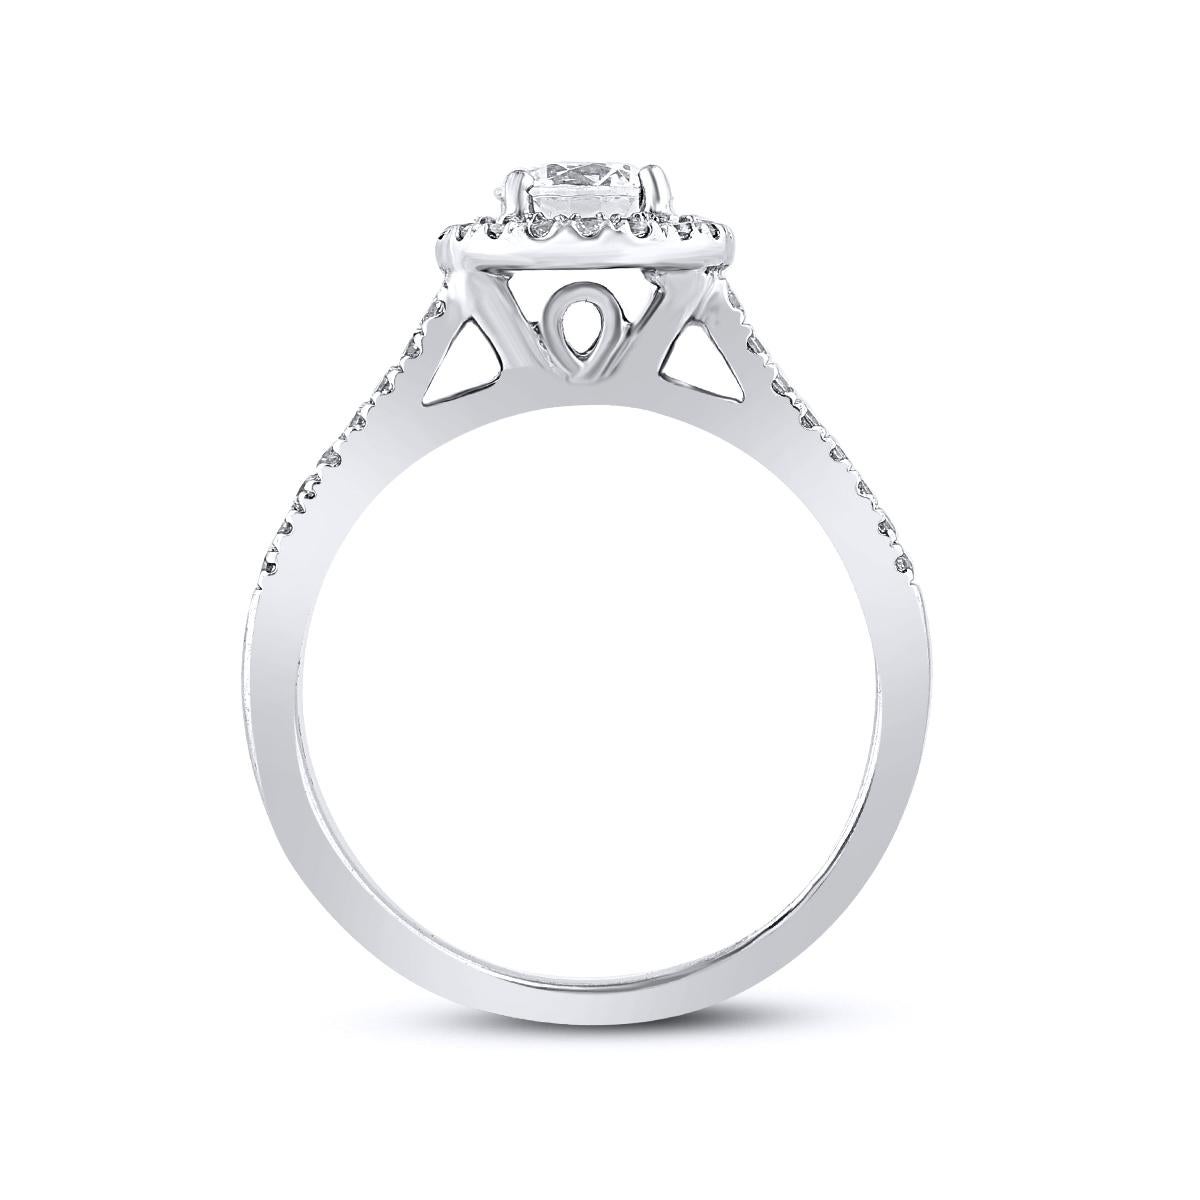 Women's TJD 1.0 Carat Brilliant Cut Round Diamond 14KT White Gold Halo Engagement Ring For Sale